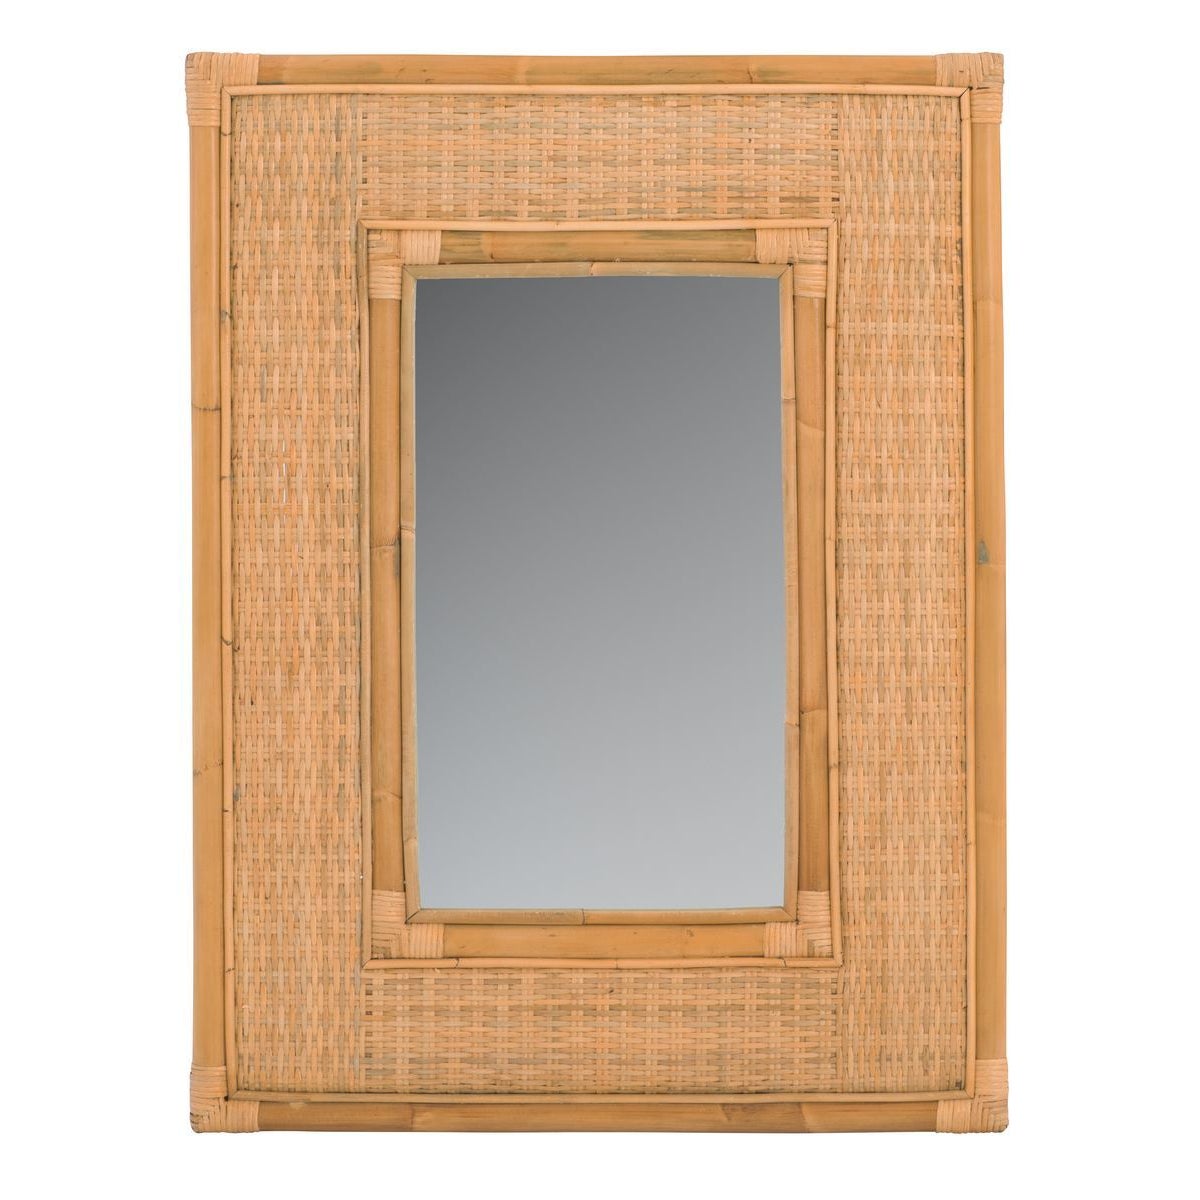 NEW!!  Newport Beach Mirror Frame - Polished RattanWeave Color  - Natural